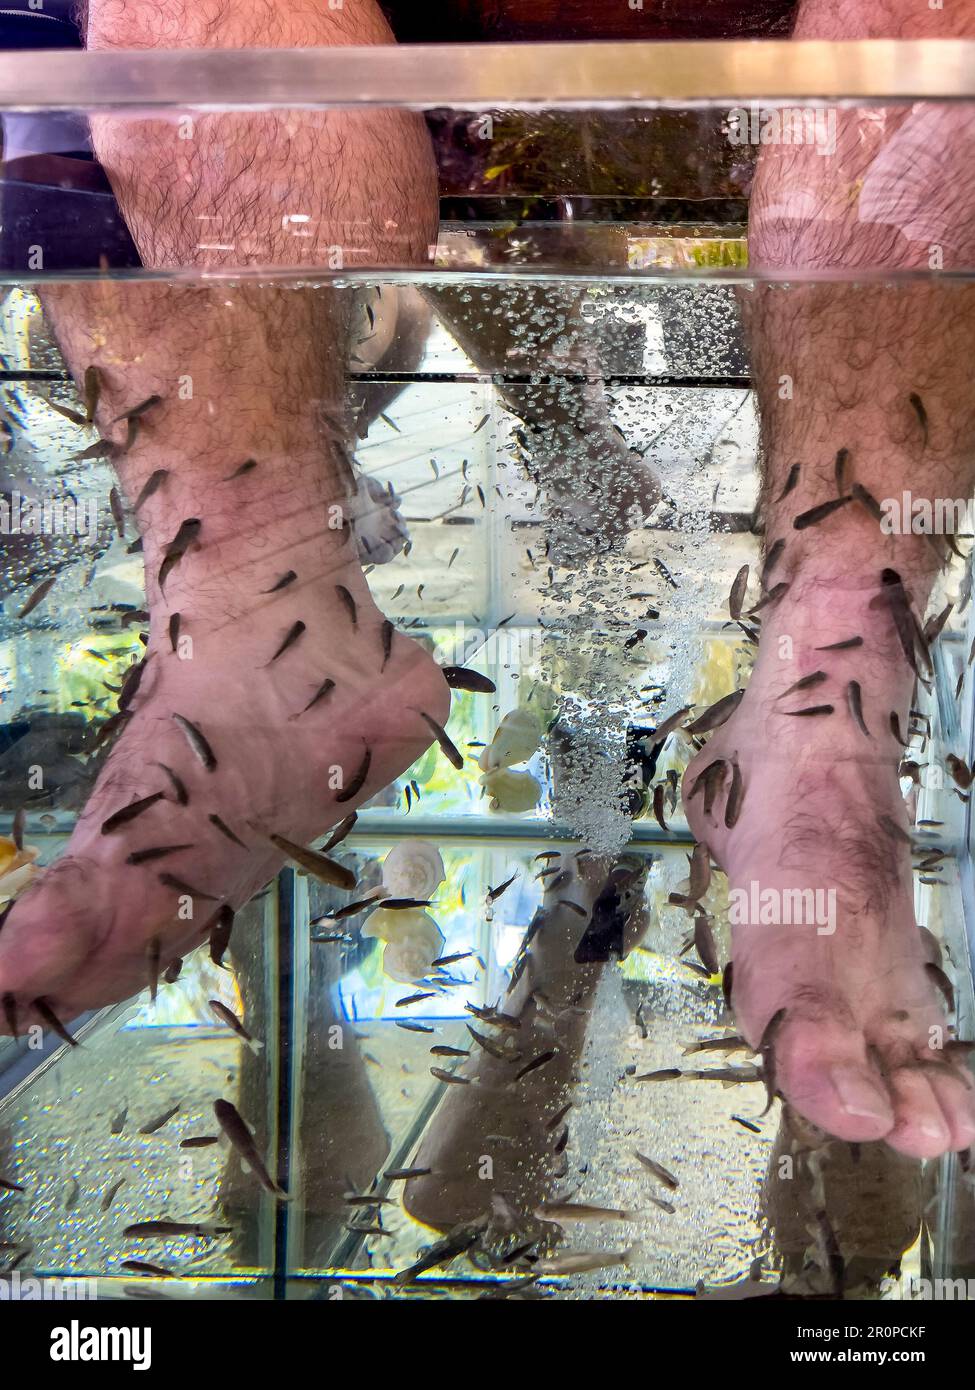 Young man's feet immersed in a water tank where fish called 'Garra Rufa' clean and exfoliate dead skin cells from the feet. Concept lifestyle and rela Stock Photo